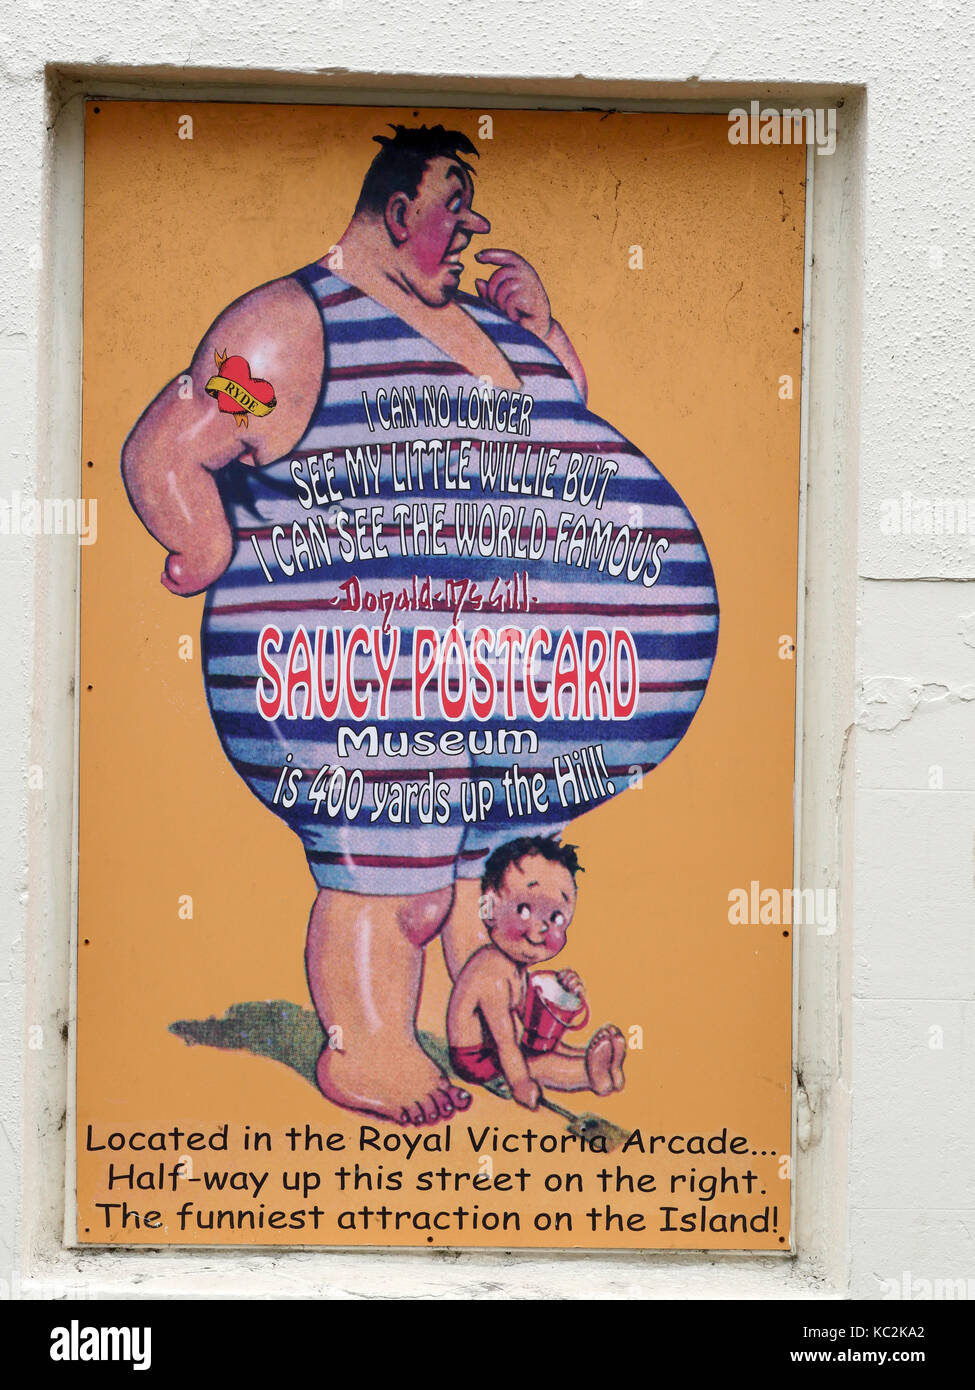 Street sign depicting a saucy postcard and giving directions to the Saucy Postcard Museum situated in the Royal Victorian Arcade, Ryde, Isle of Wight. Stock Photo